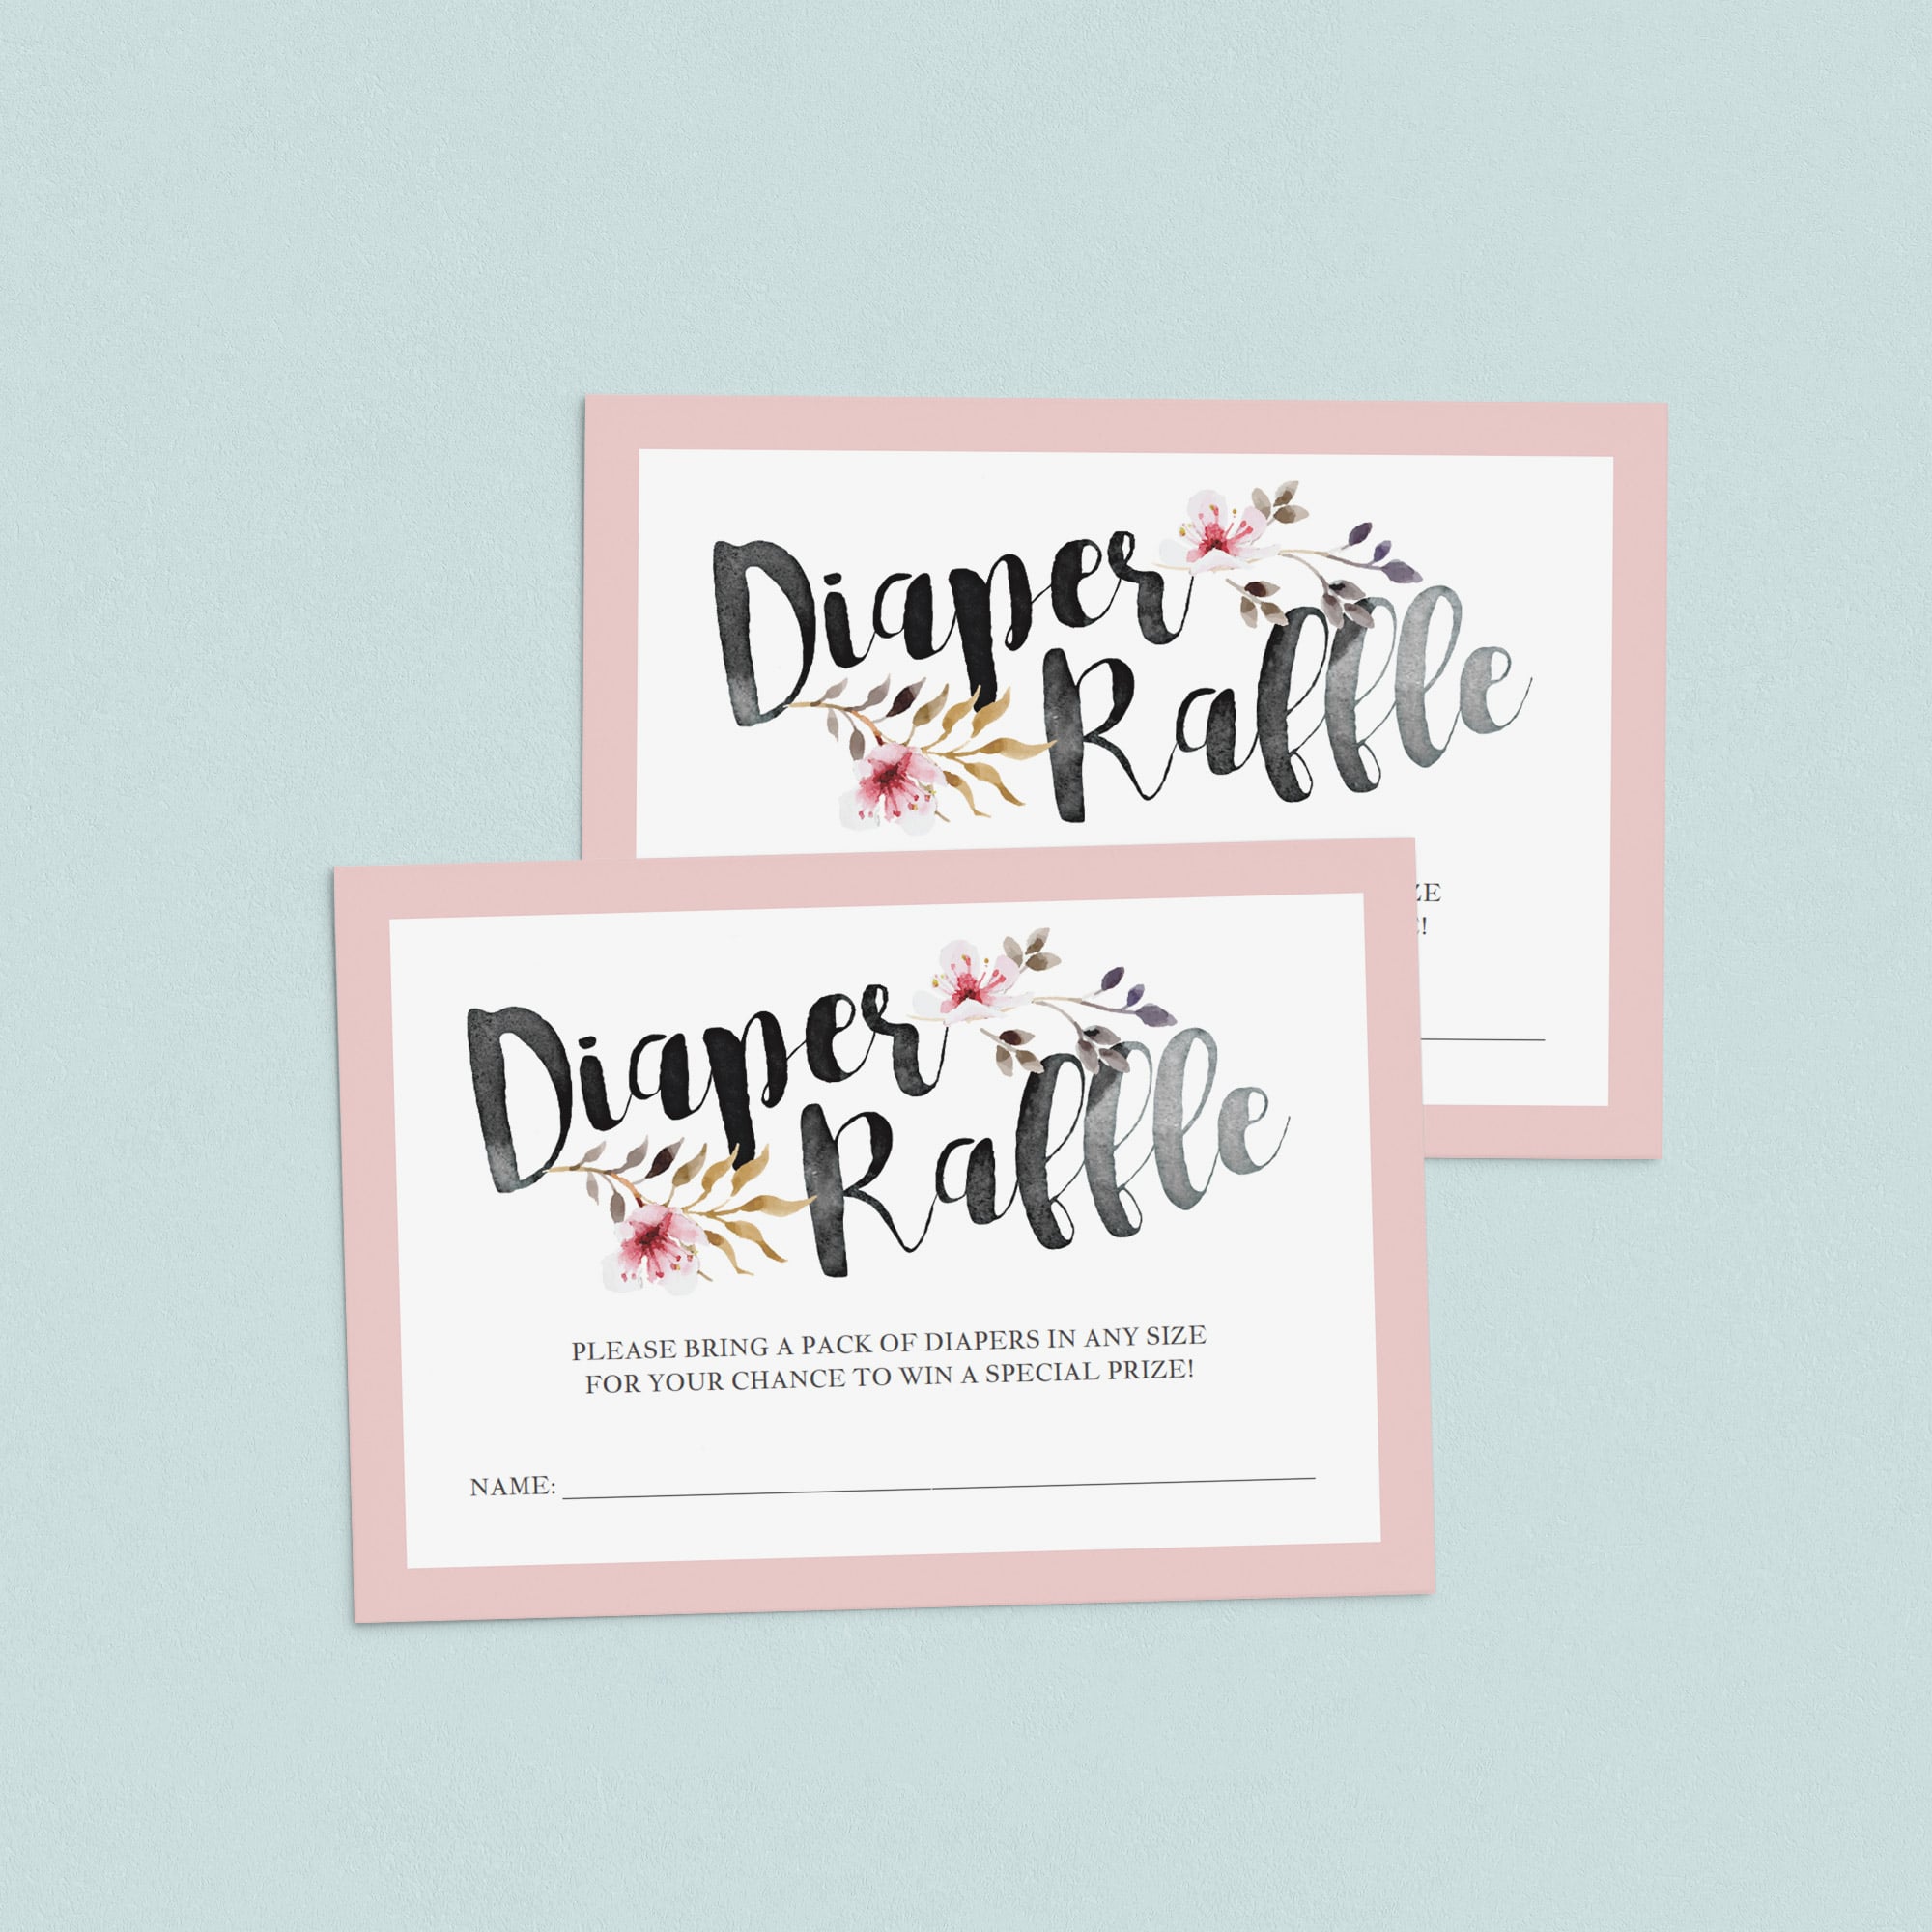 Editable diaper tickets for girl baby shower by LittleSizzle